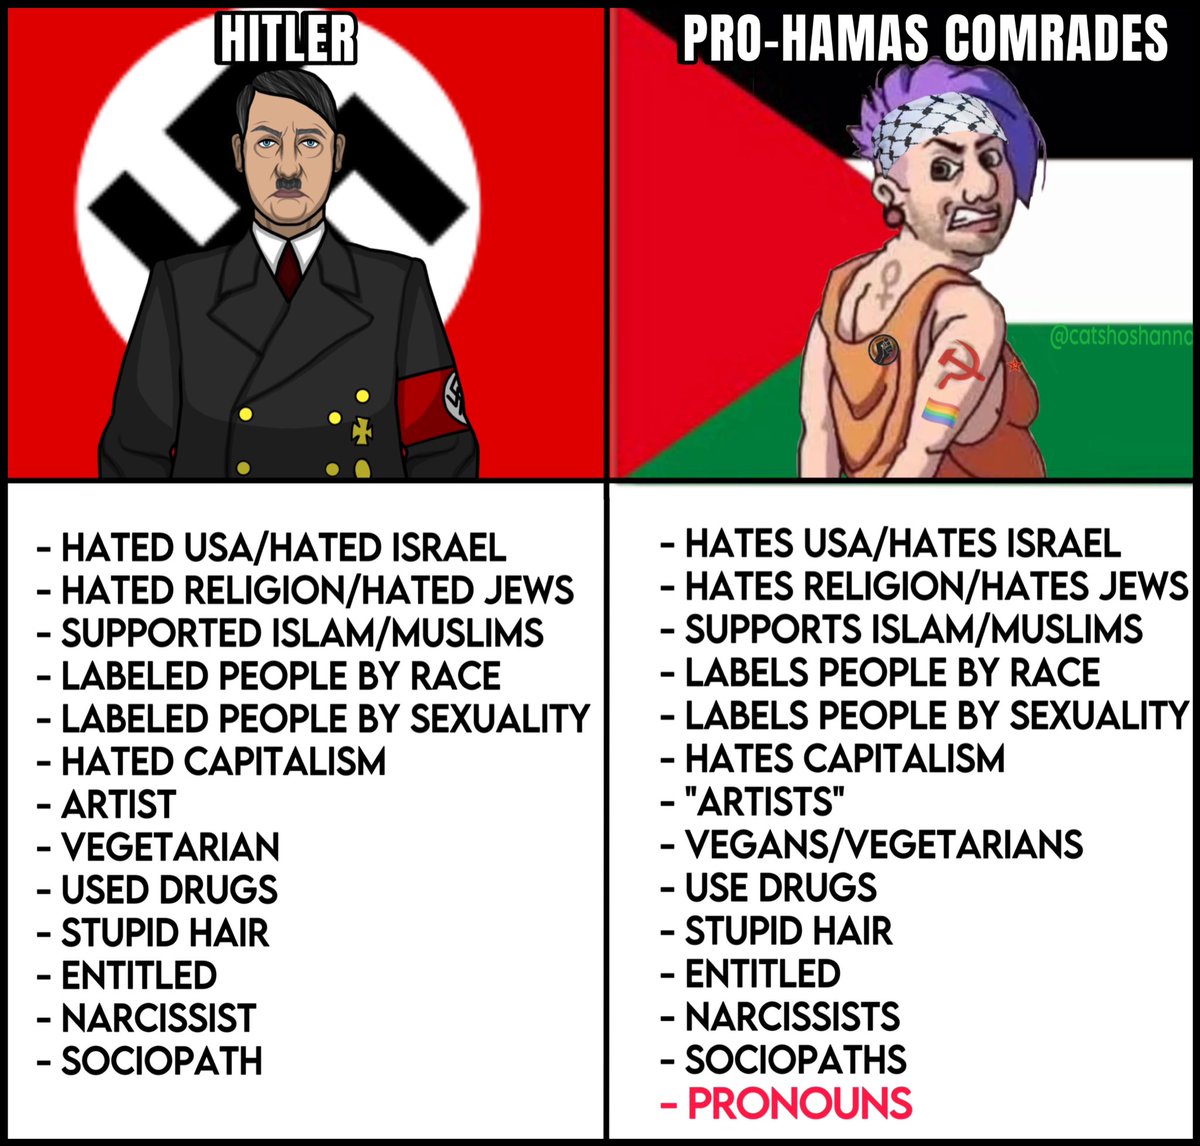 Perhaps it's time for self-reflection if the only thing setting you apart from Hitler is #Pronouns.